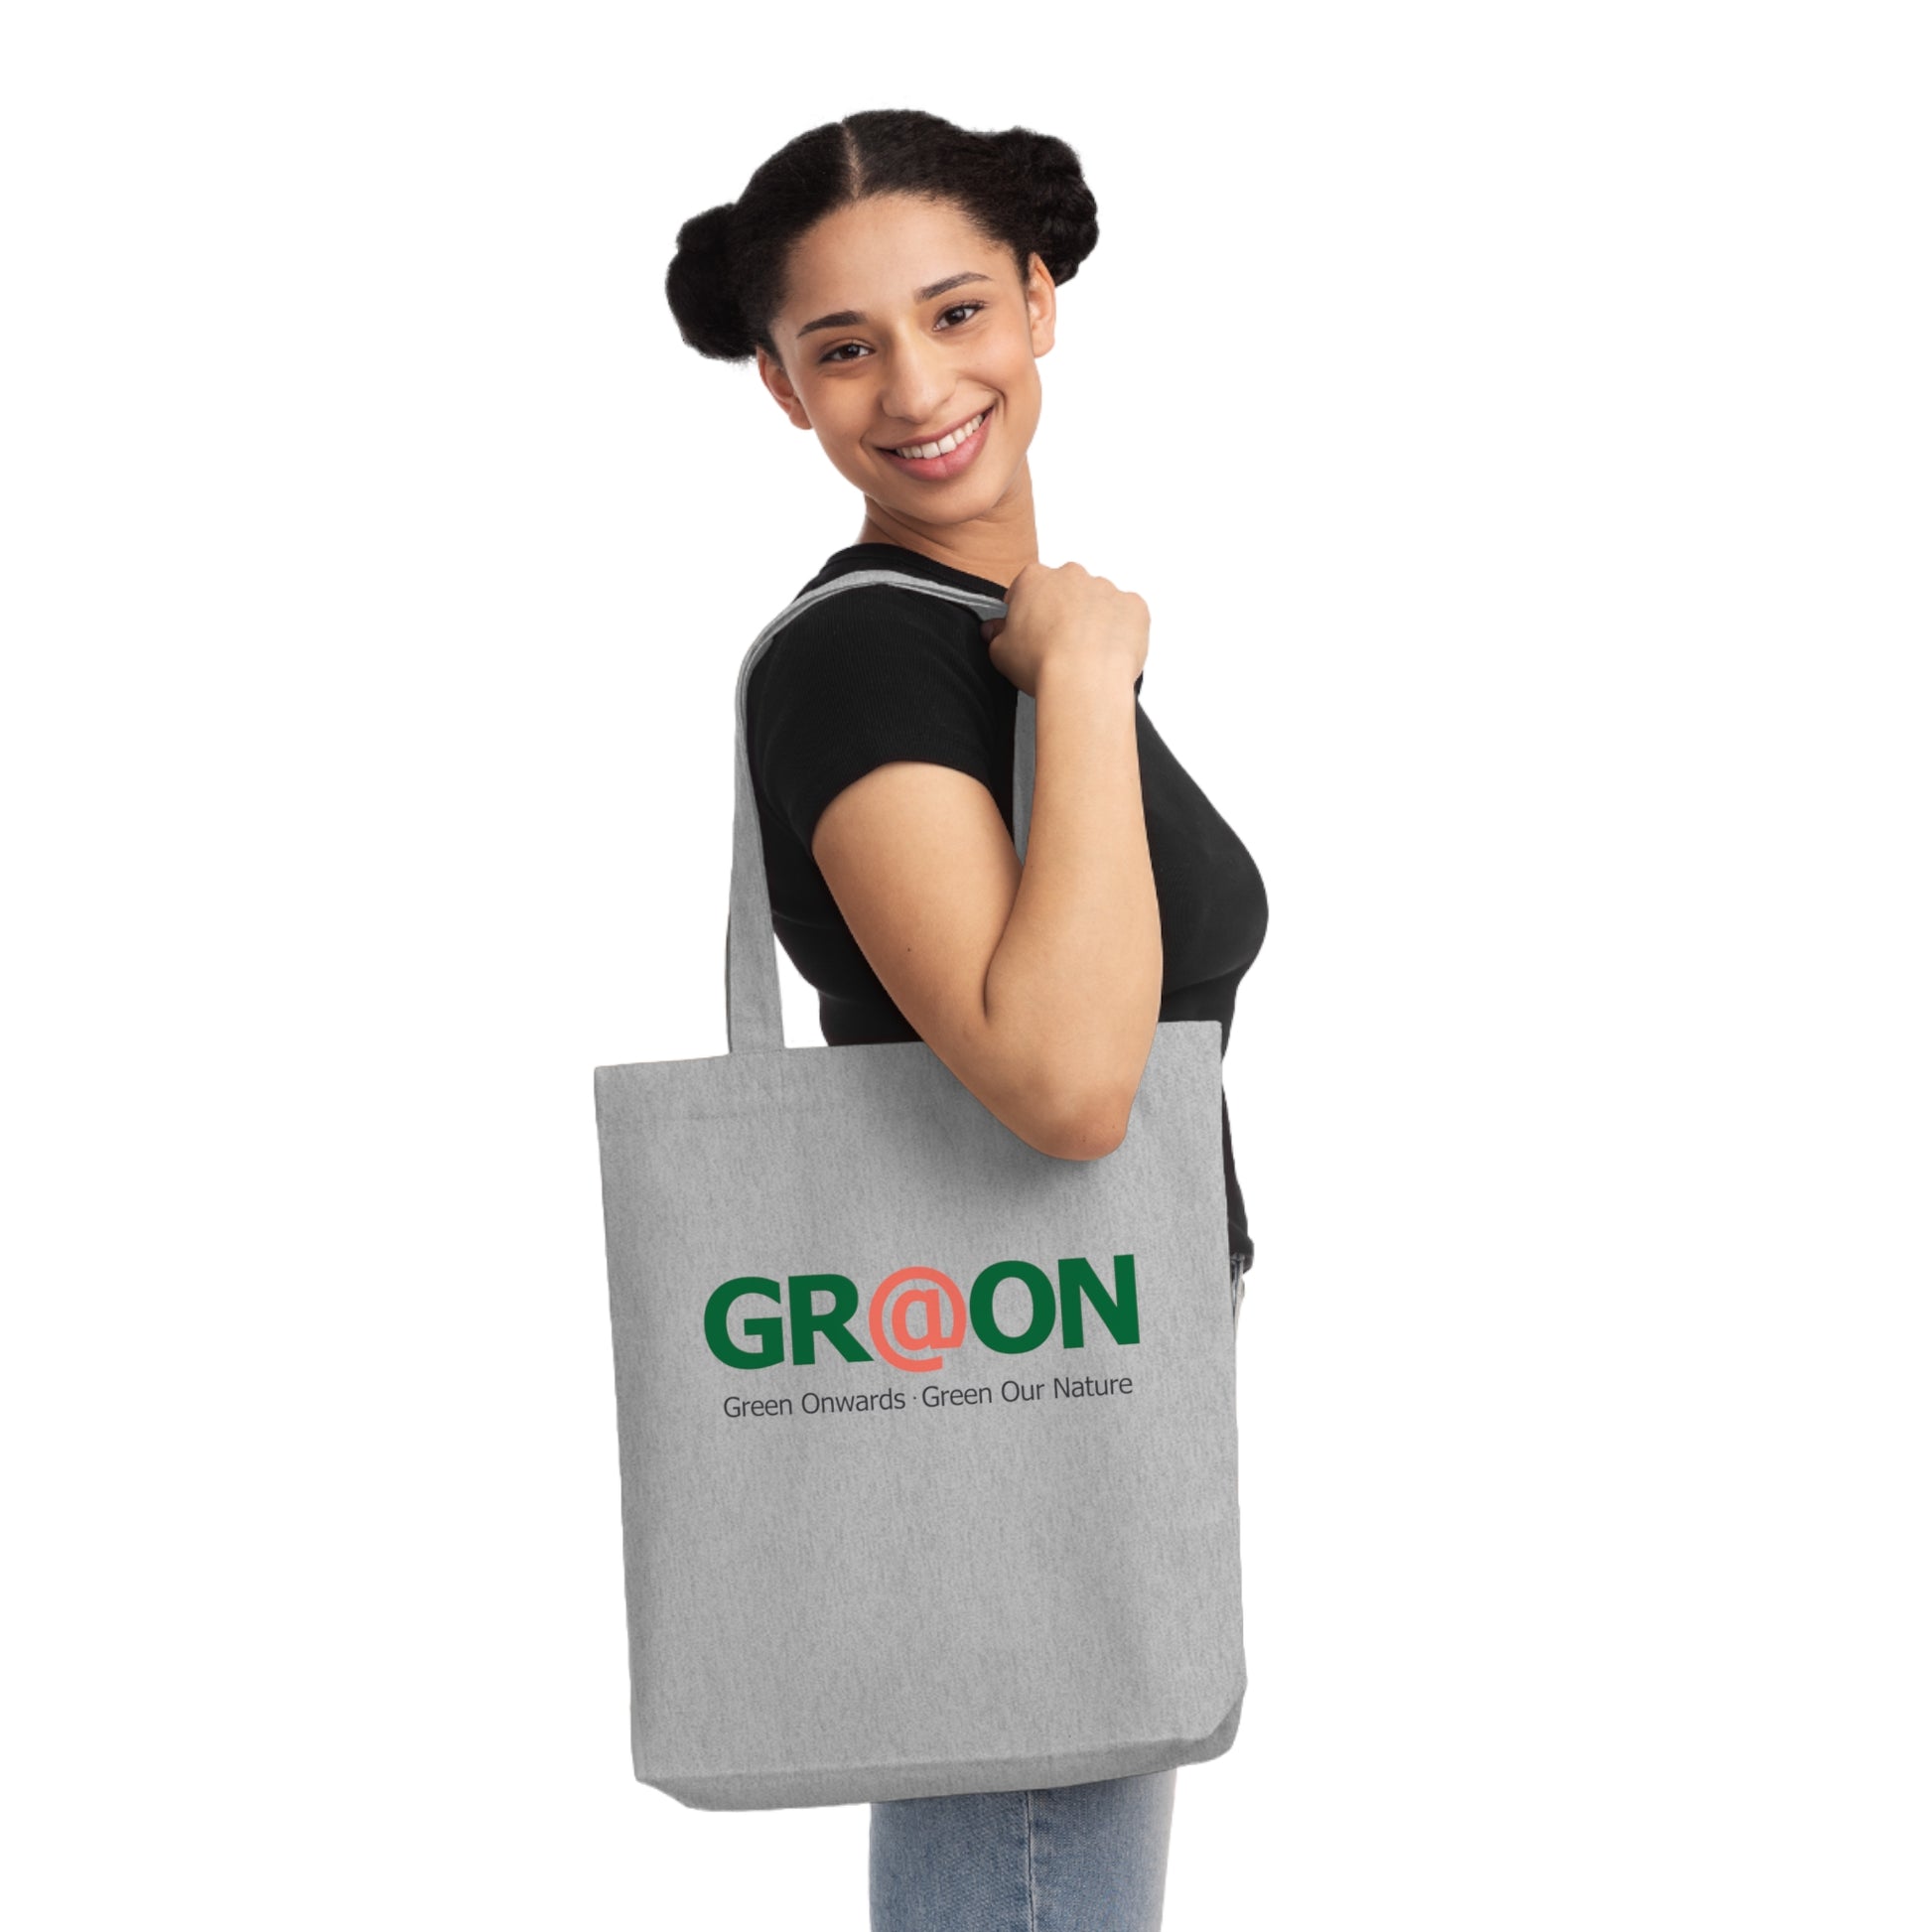 Person carrying a GR@ON Tote Bag made from organic cotton, filled with everyday essentials. GR@ON Tote Bags: Sustainable style, everyday essentials.